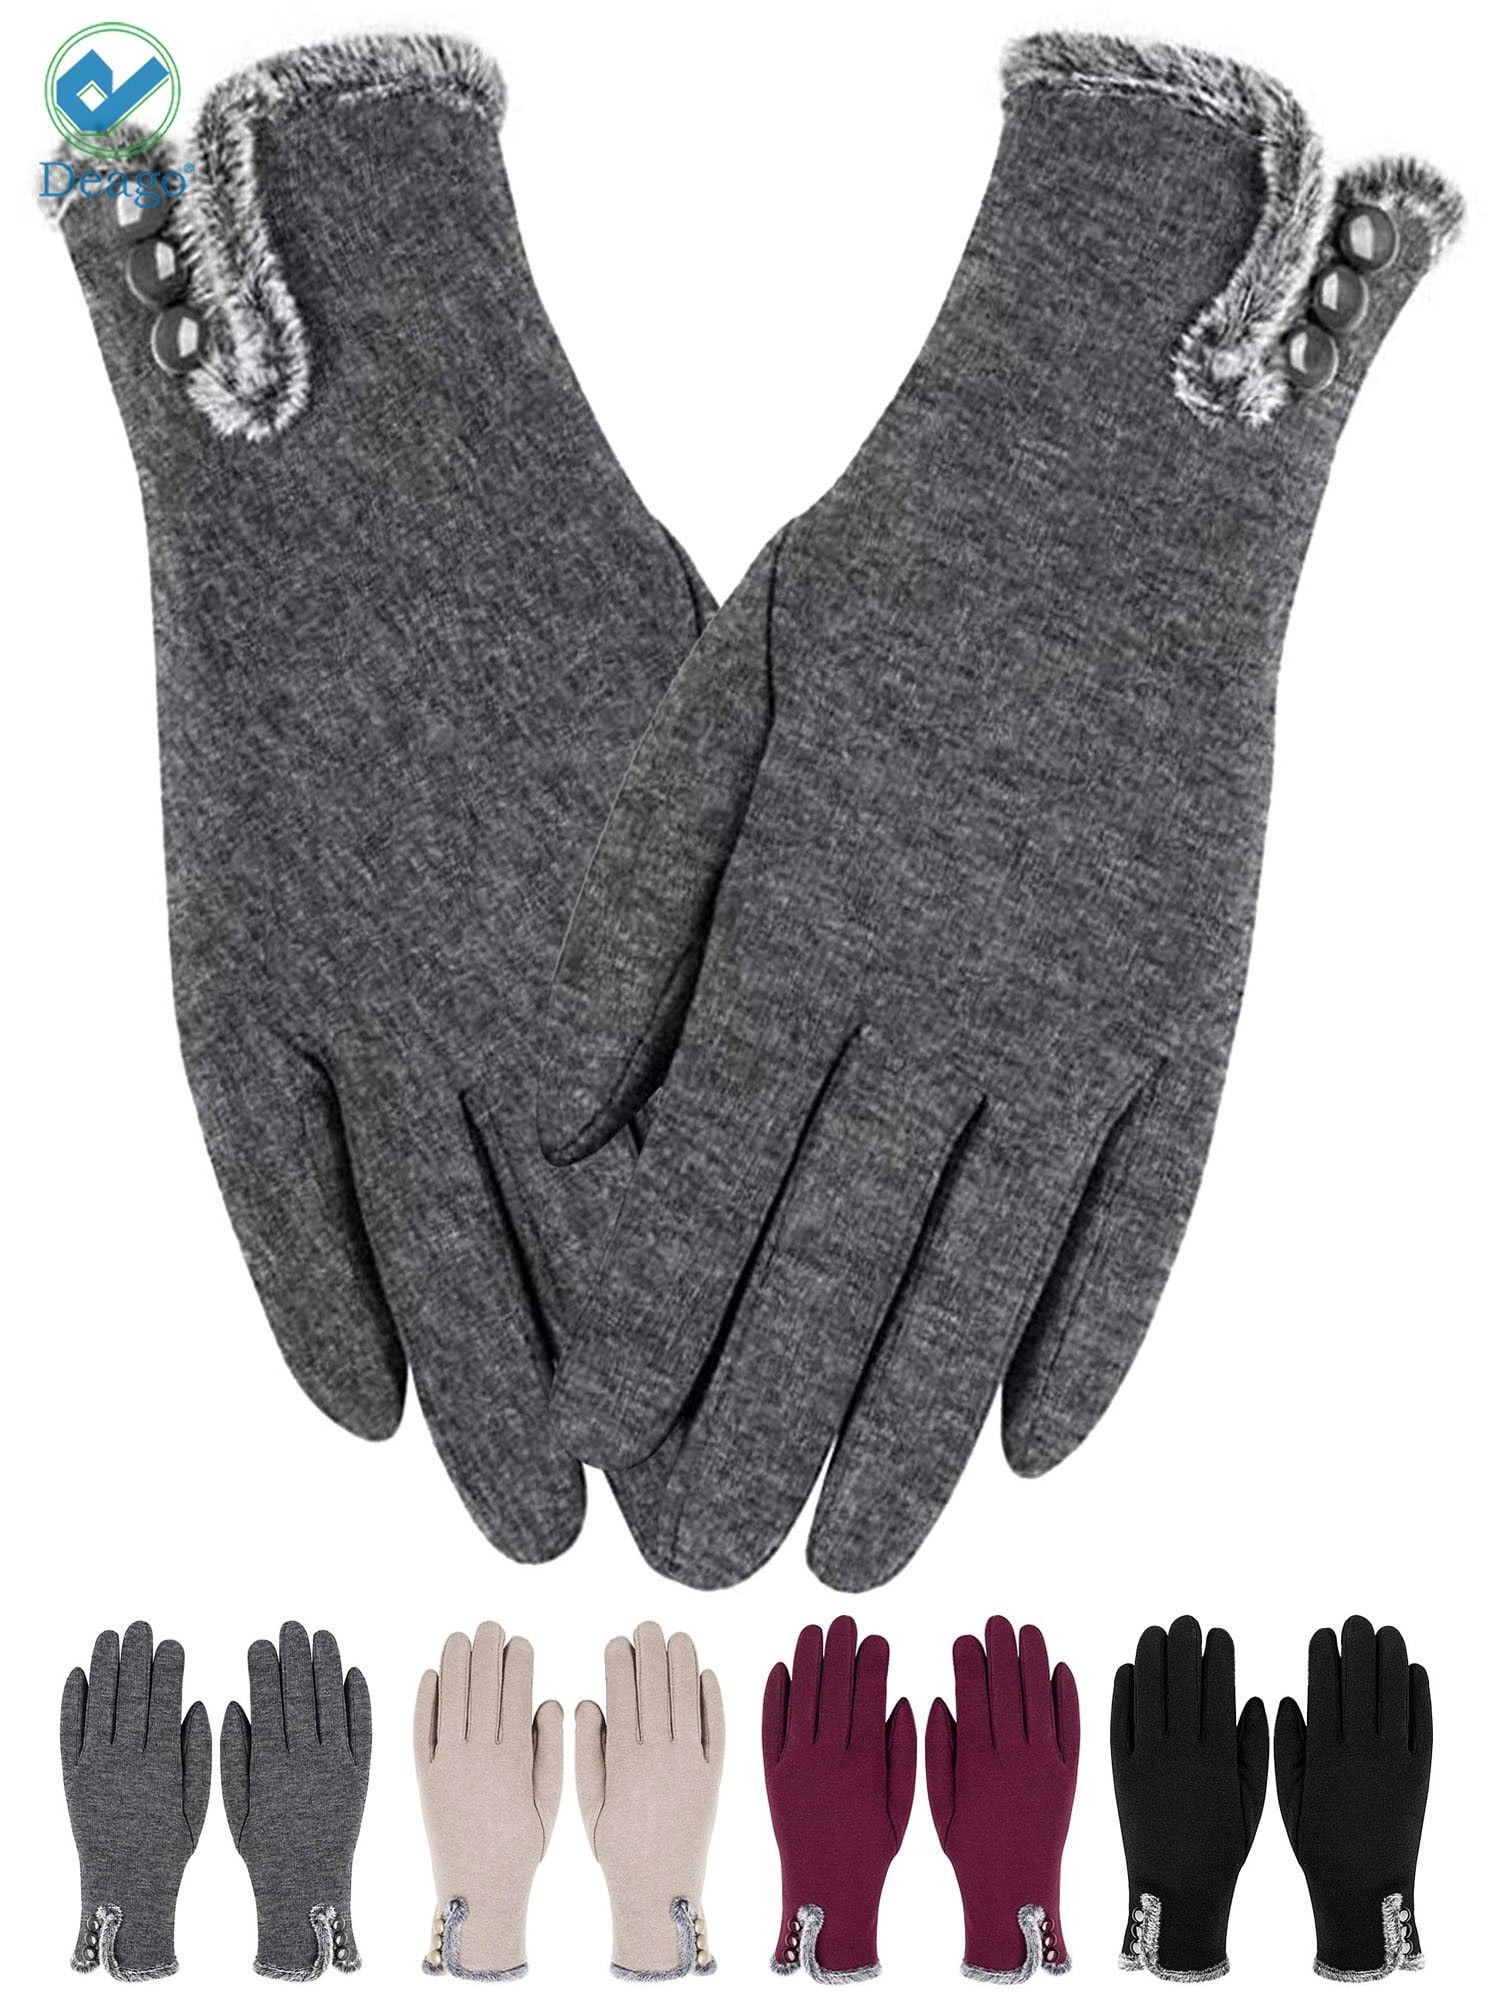 Unisex One Size Fits Most Winter Touch Screen Gloves Thick Windproof 